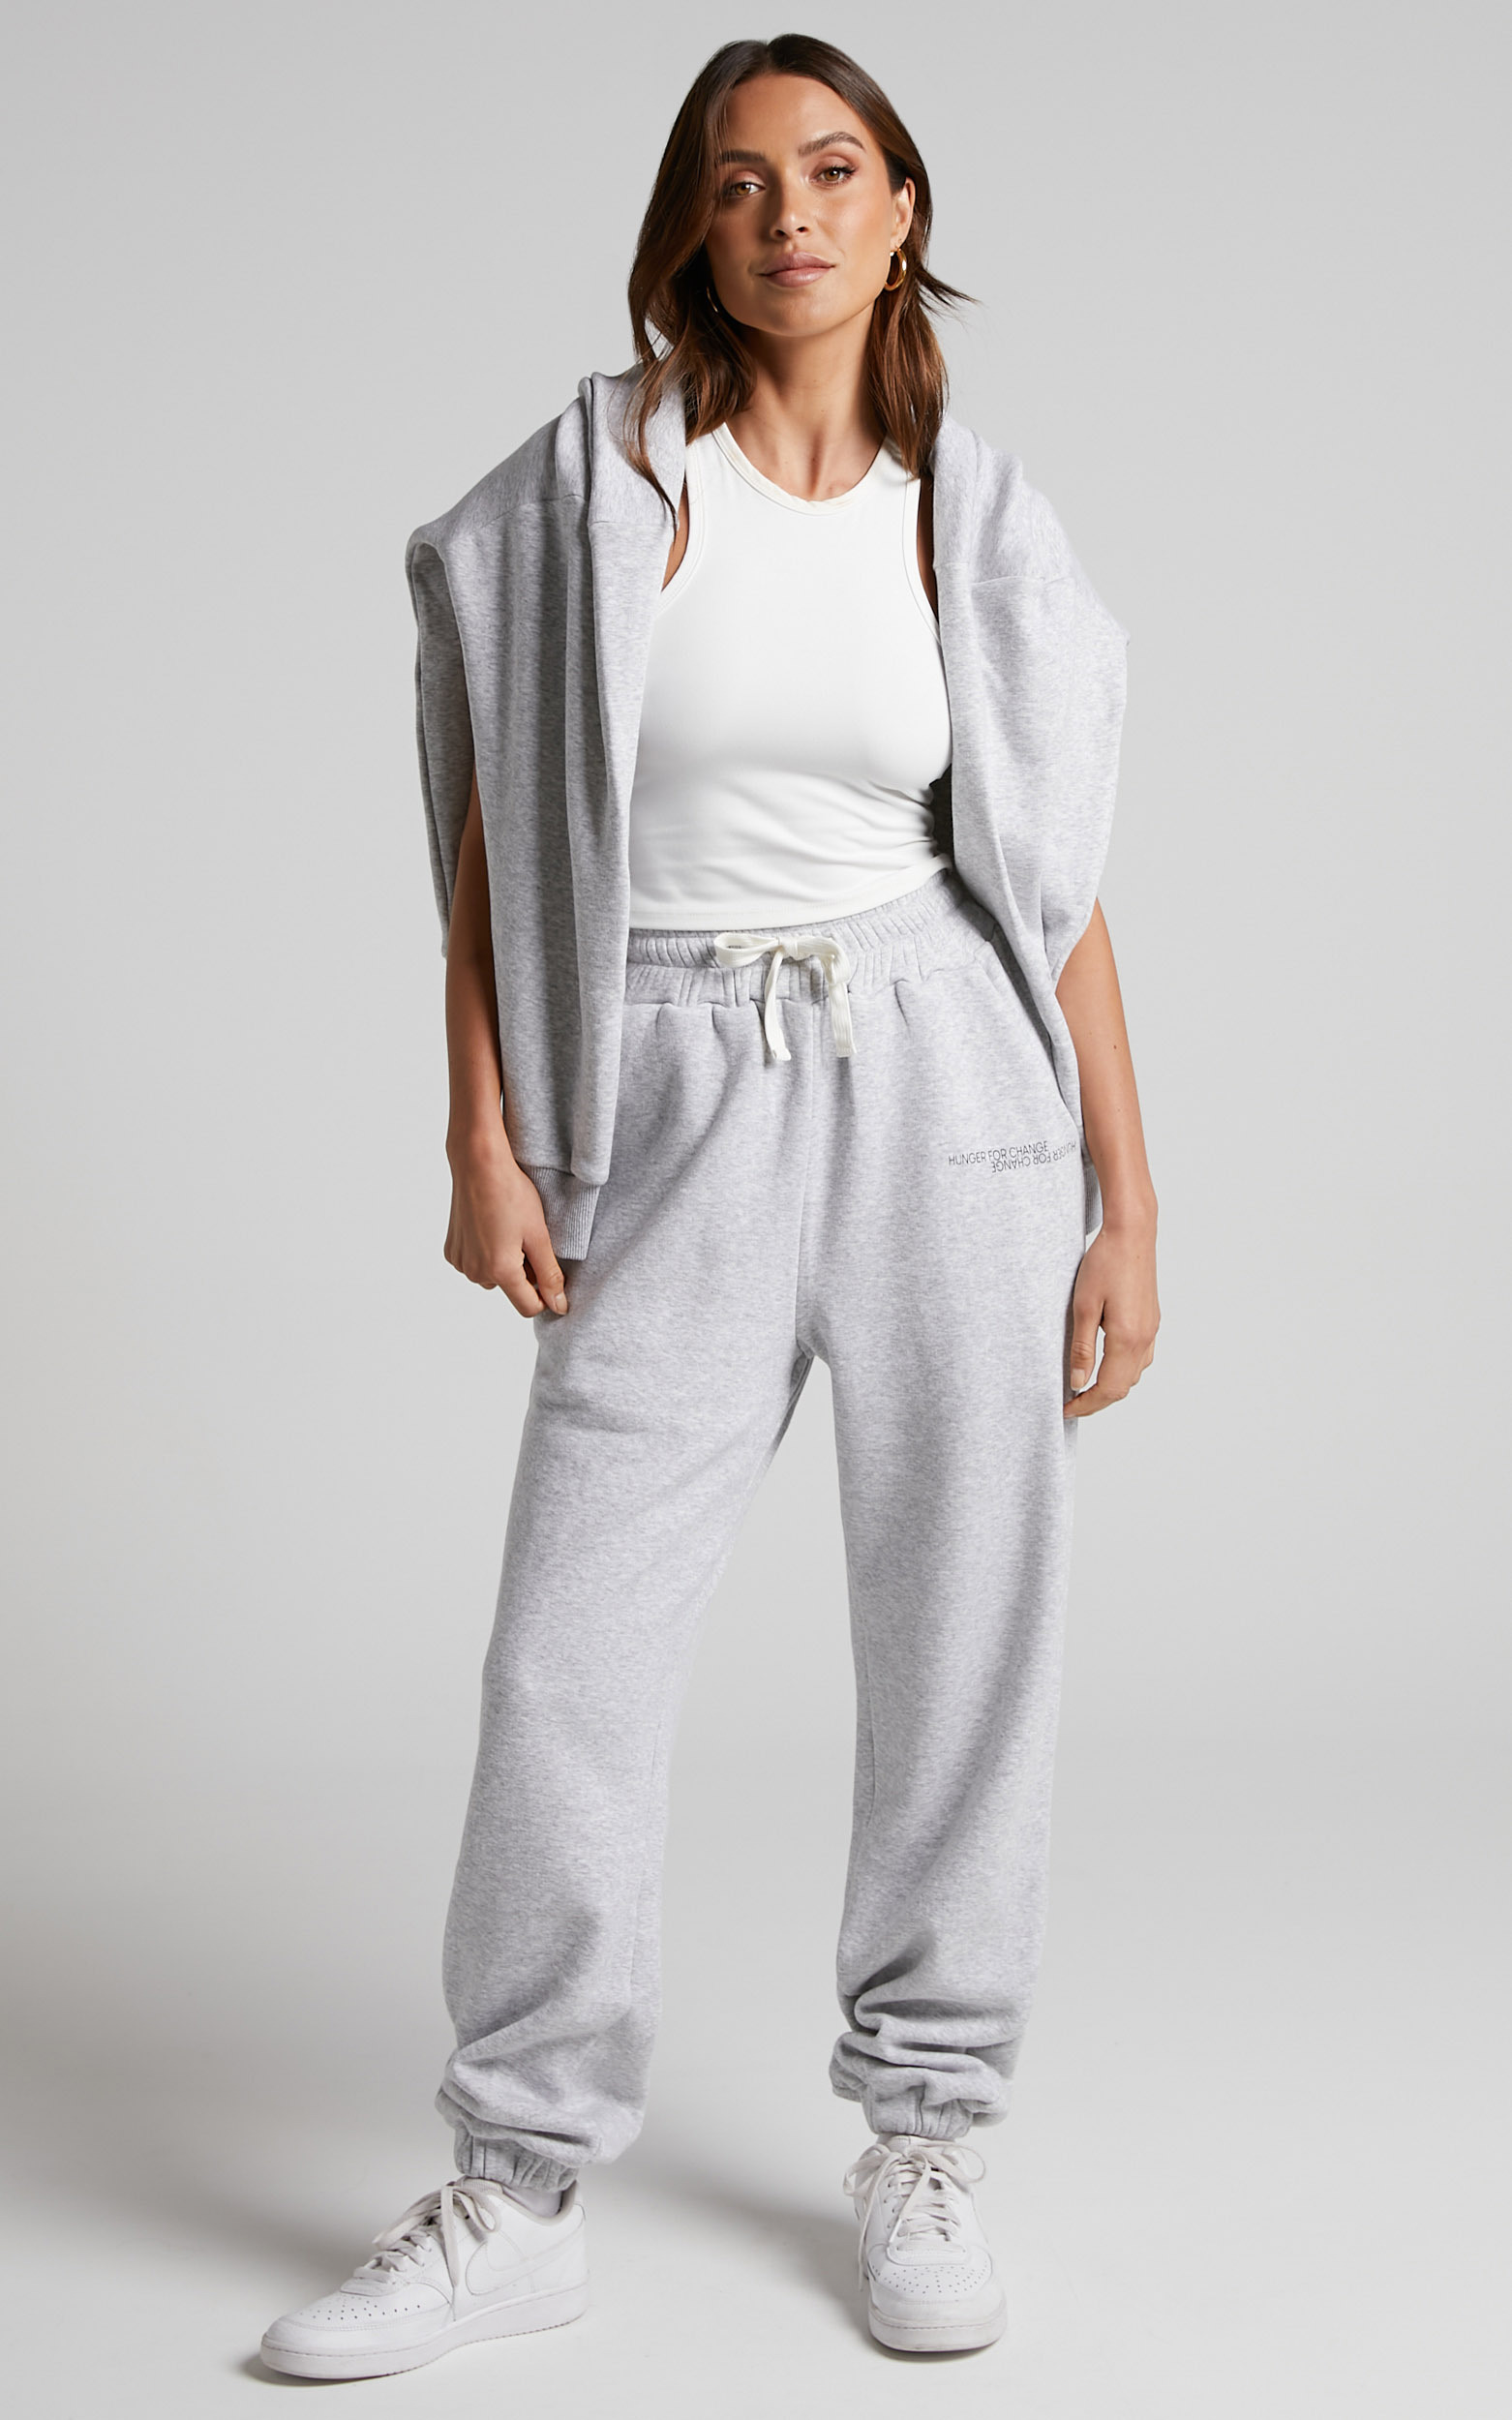 Sunday Leisure Club - The Hunger Project x Showpo Sweatpants in Grey - L/XL, GRY2, hi-res image number null